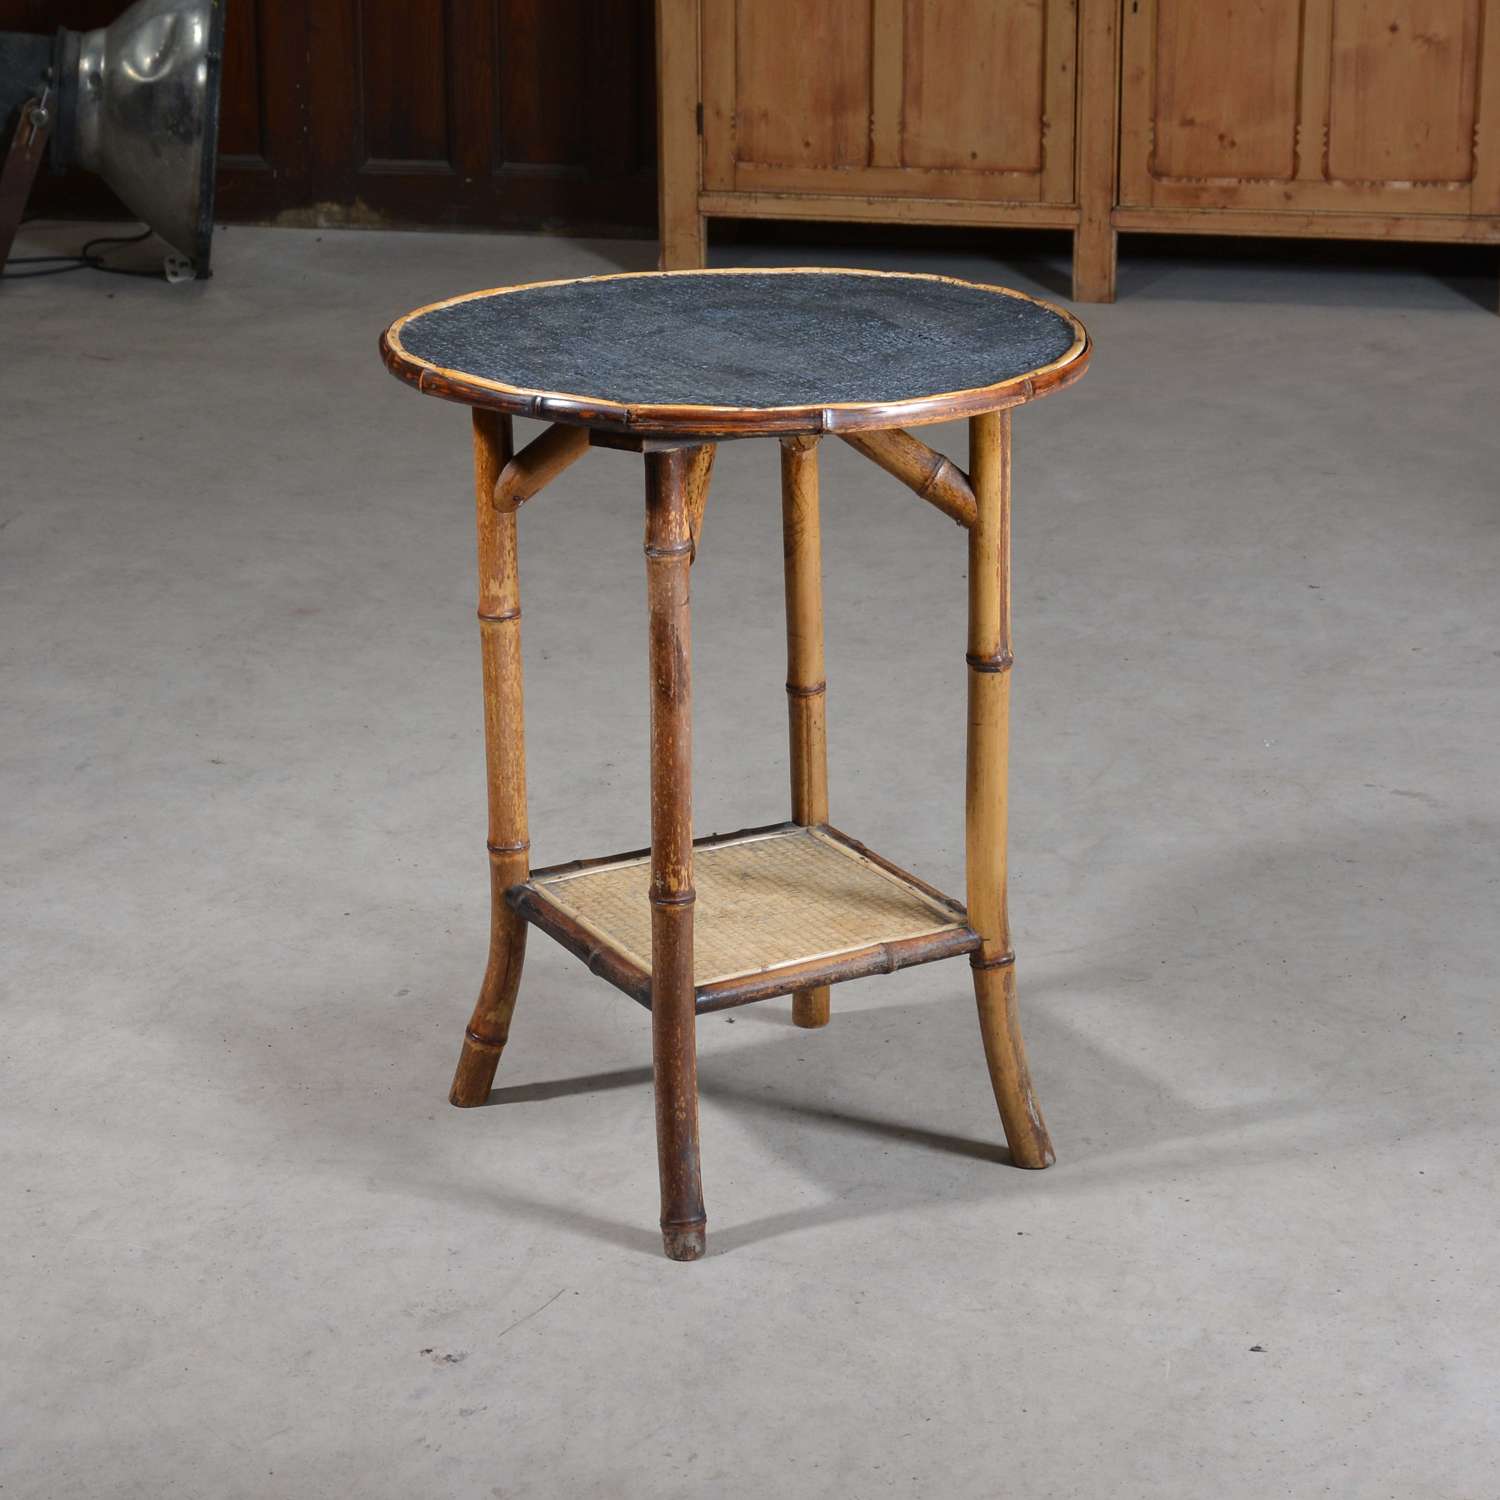 Circular bamboo side table or bedside